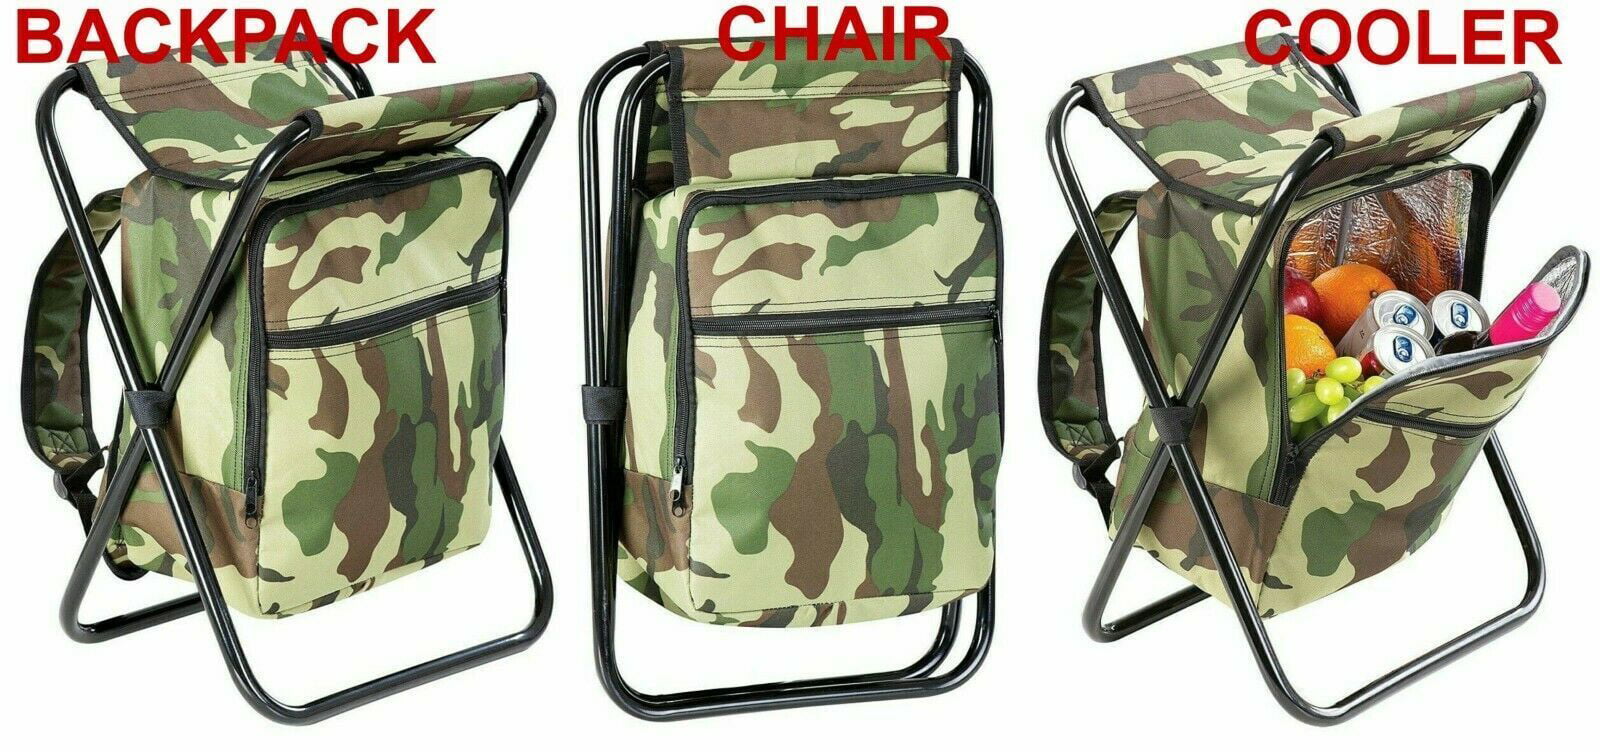 Folding Cooler and Stool Backpack - Multifunction Collapsible